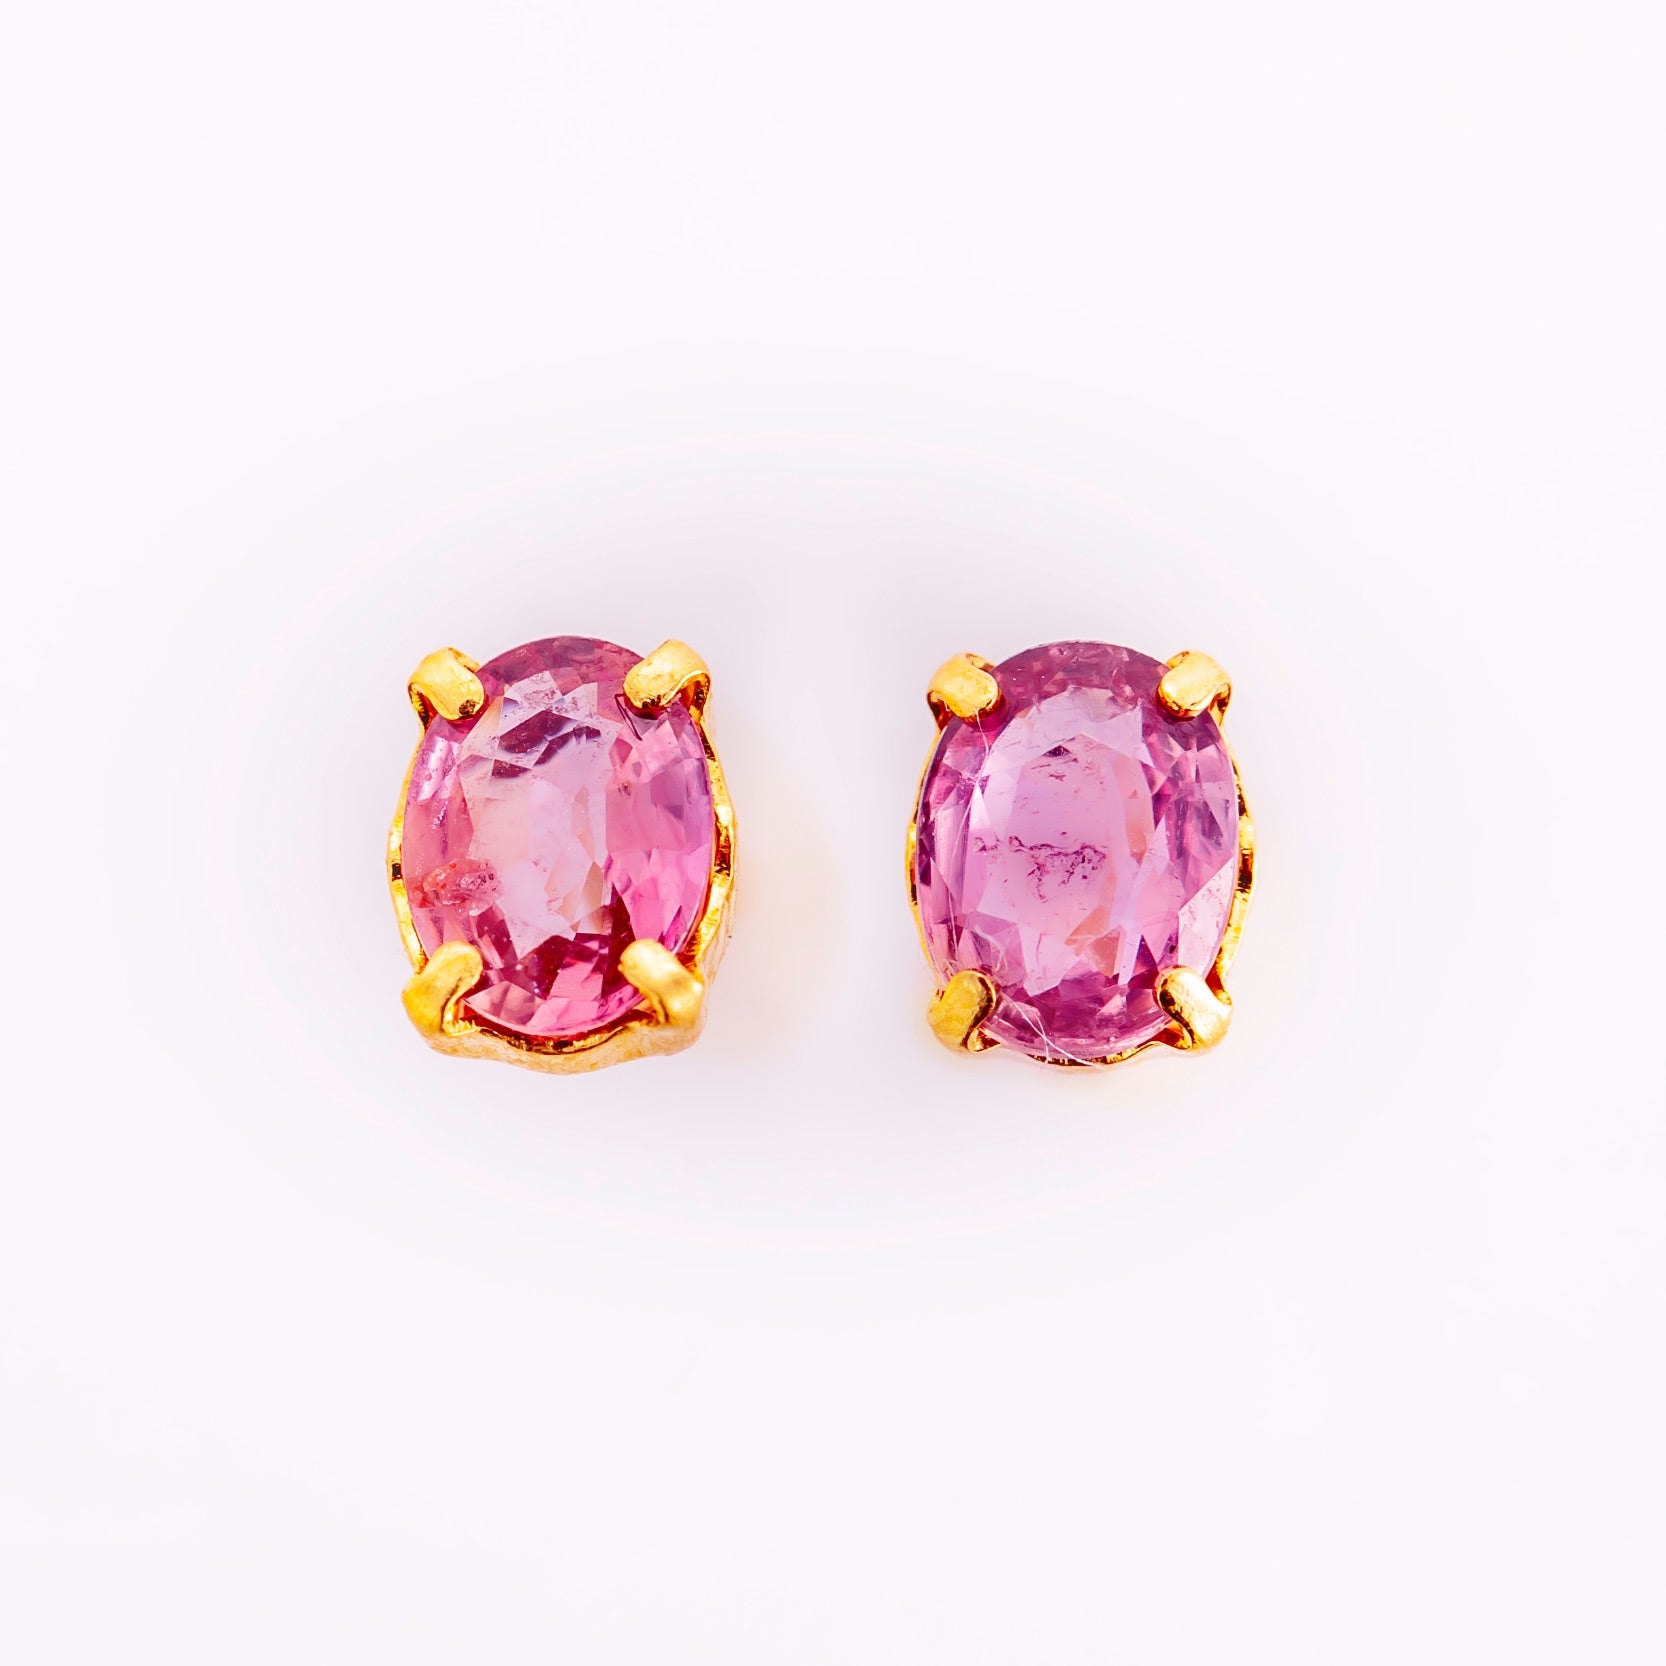 K18 Rose Clair/Rose Claire Pink Sapphire Earrings